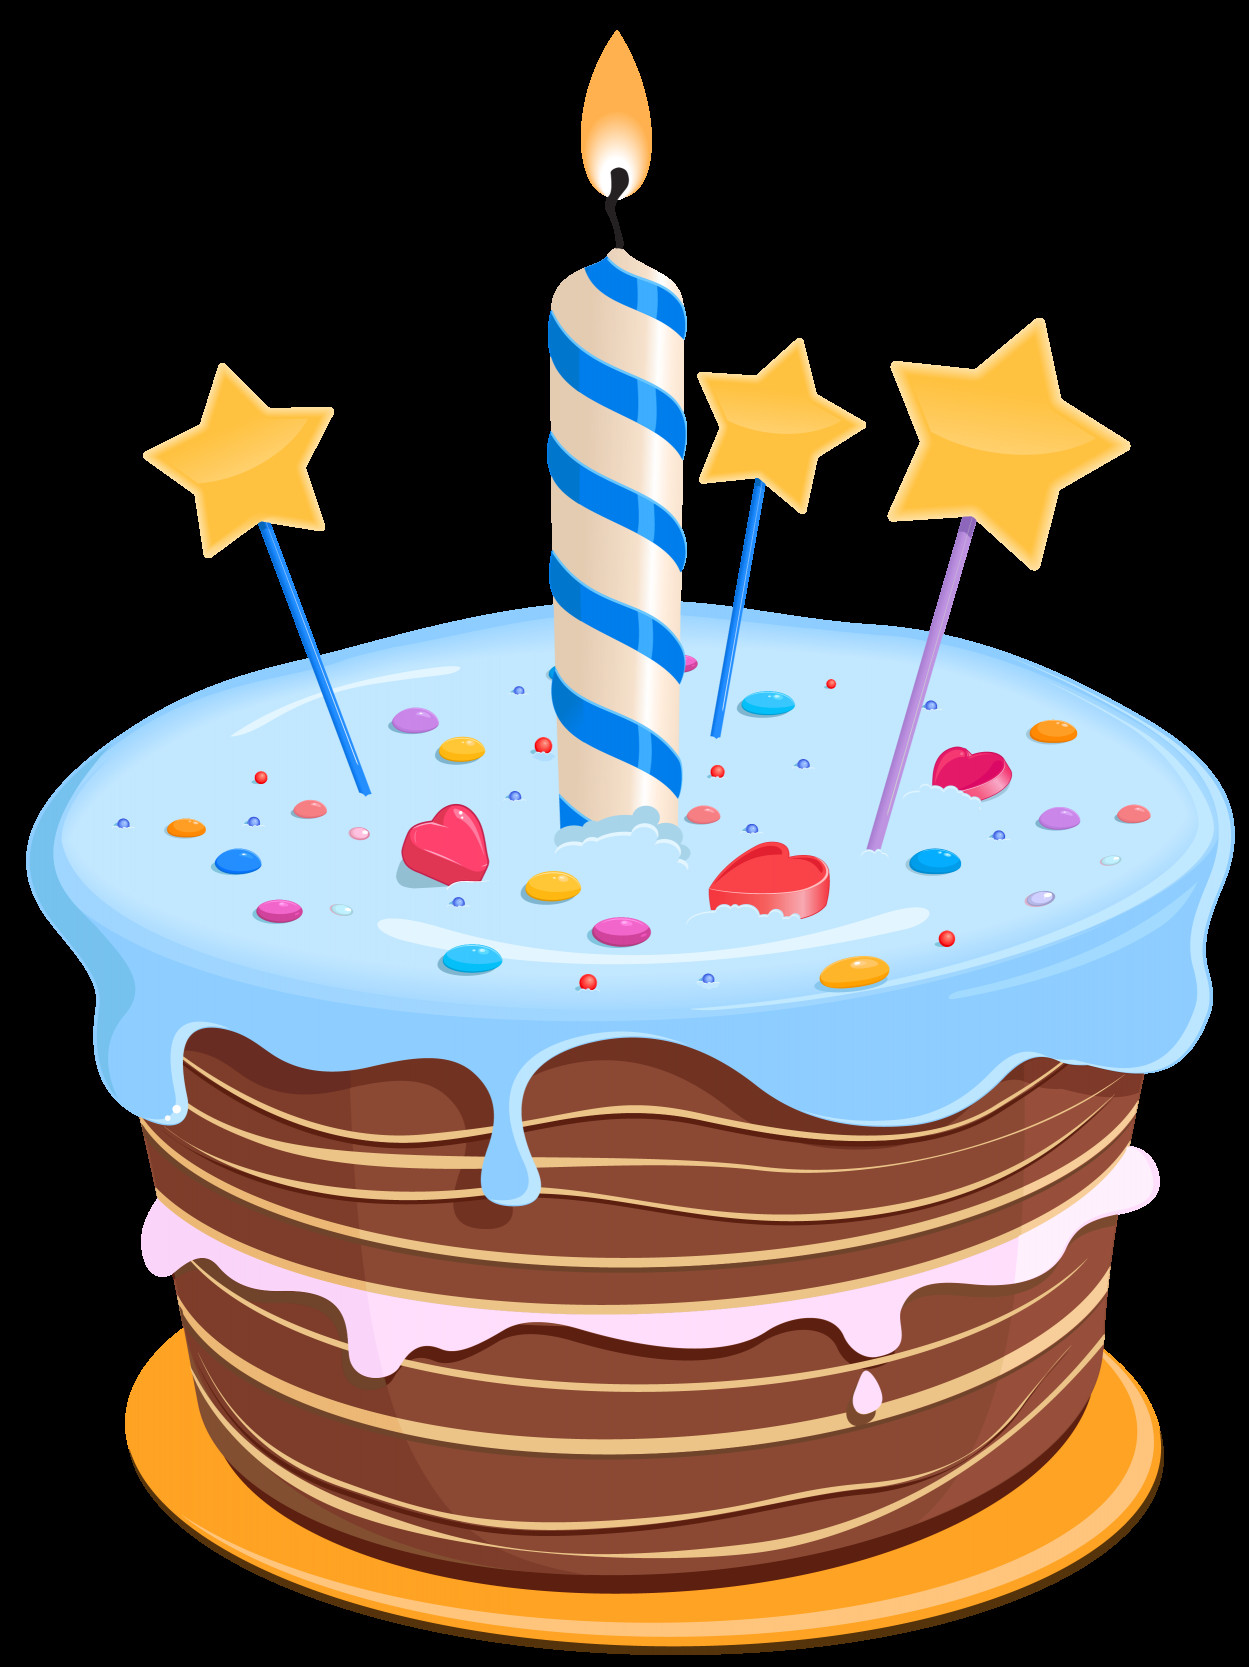 Clipart Birthday Cake
 Set these cute birthday cake clipart as desktop profile in